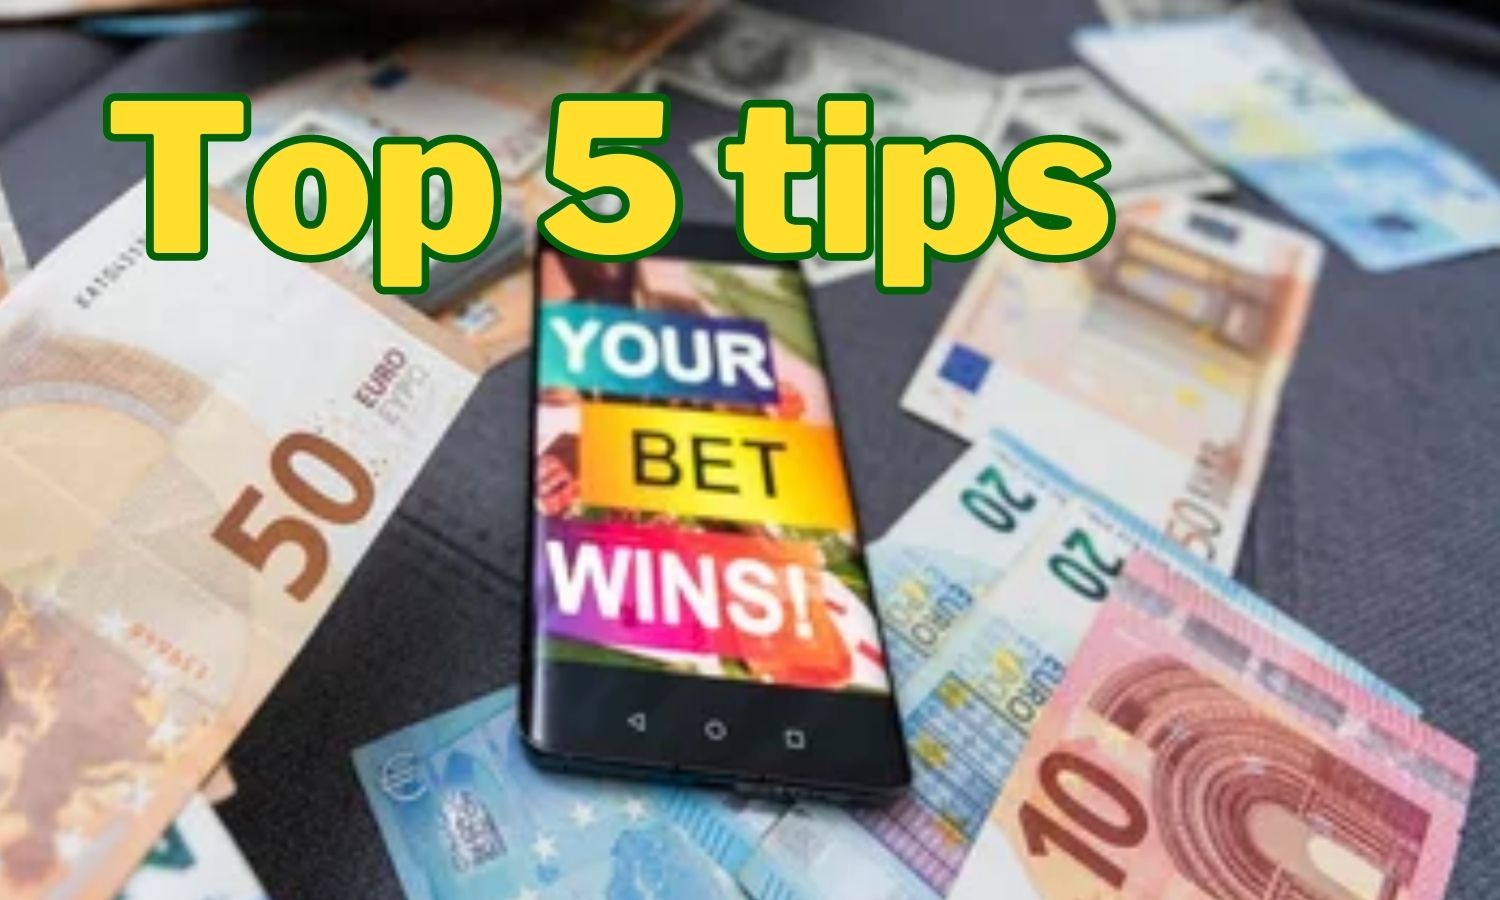 List of Top 5 tips for productive sports betting in India